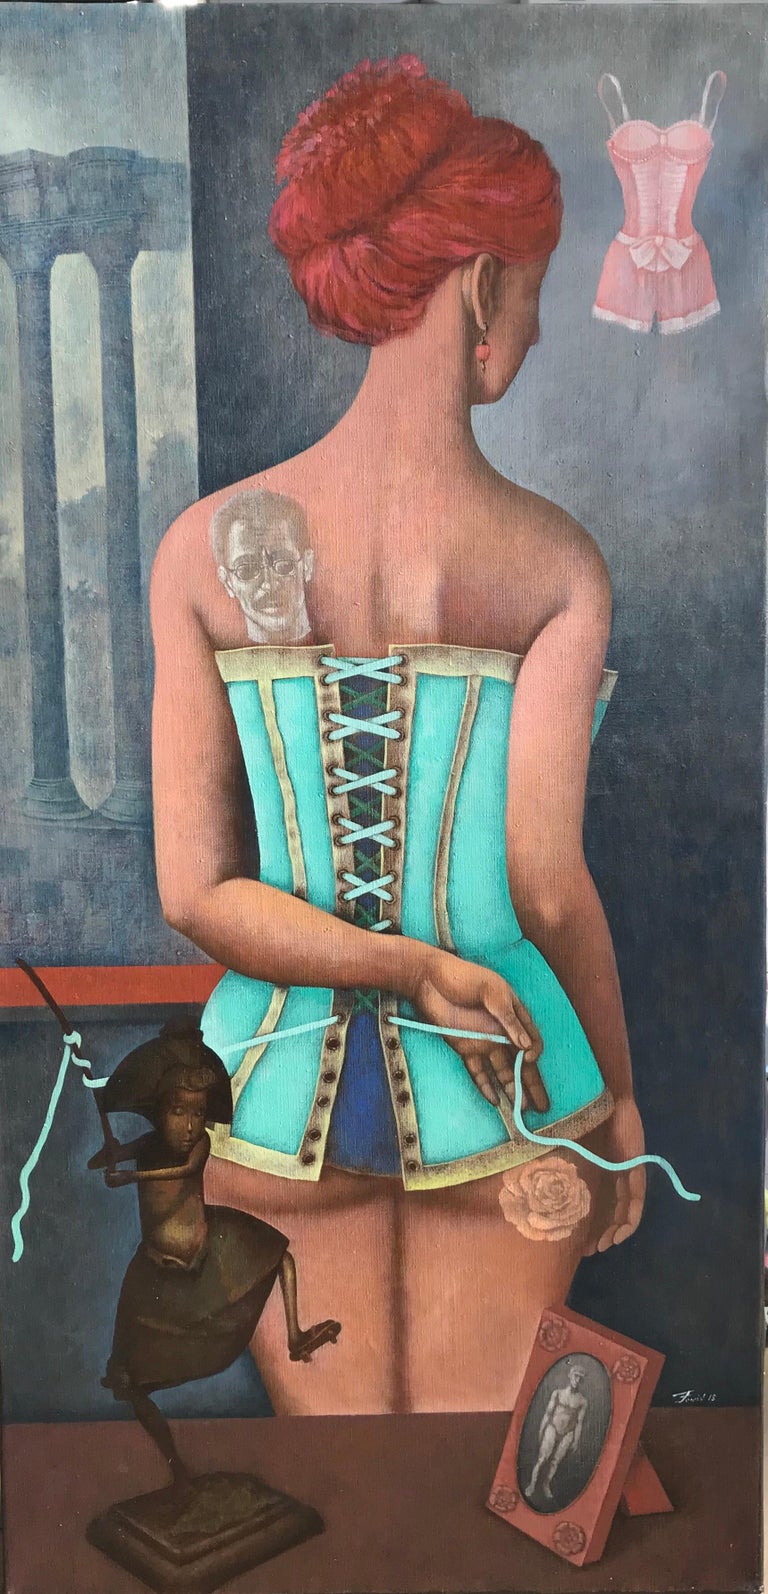 Igor Fomin Interior Painting - The Corset-a ginger girl in corset, made in grey, blue, brown, turquoise color